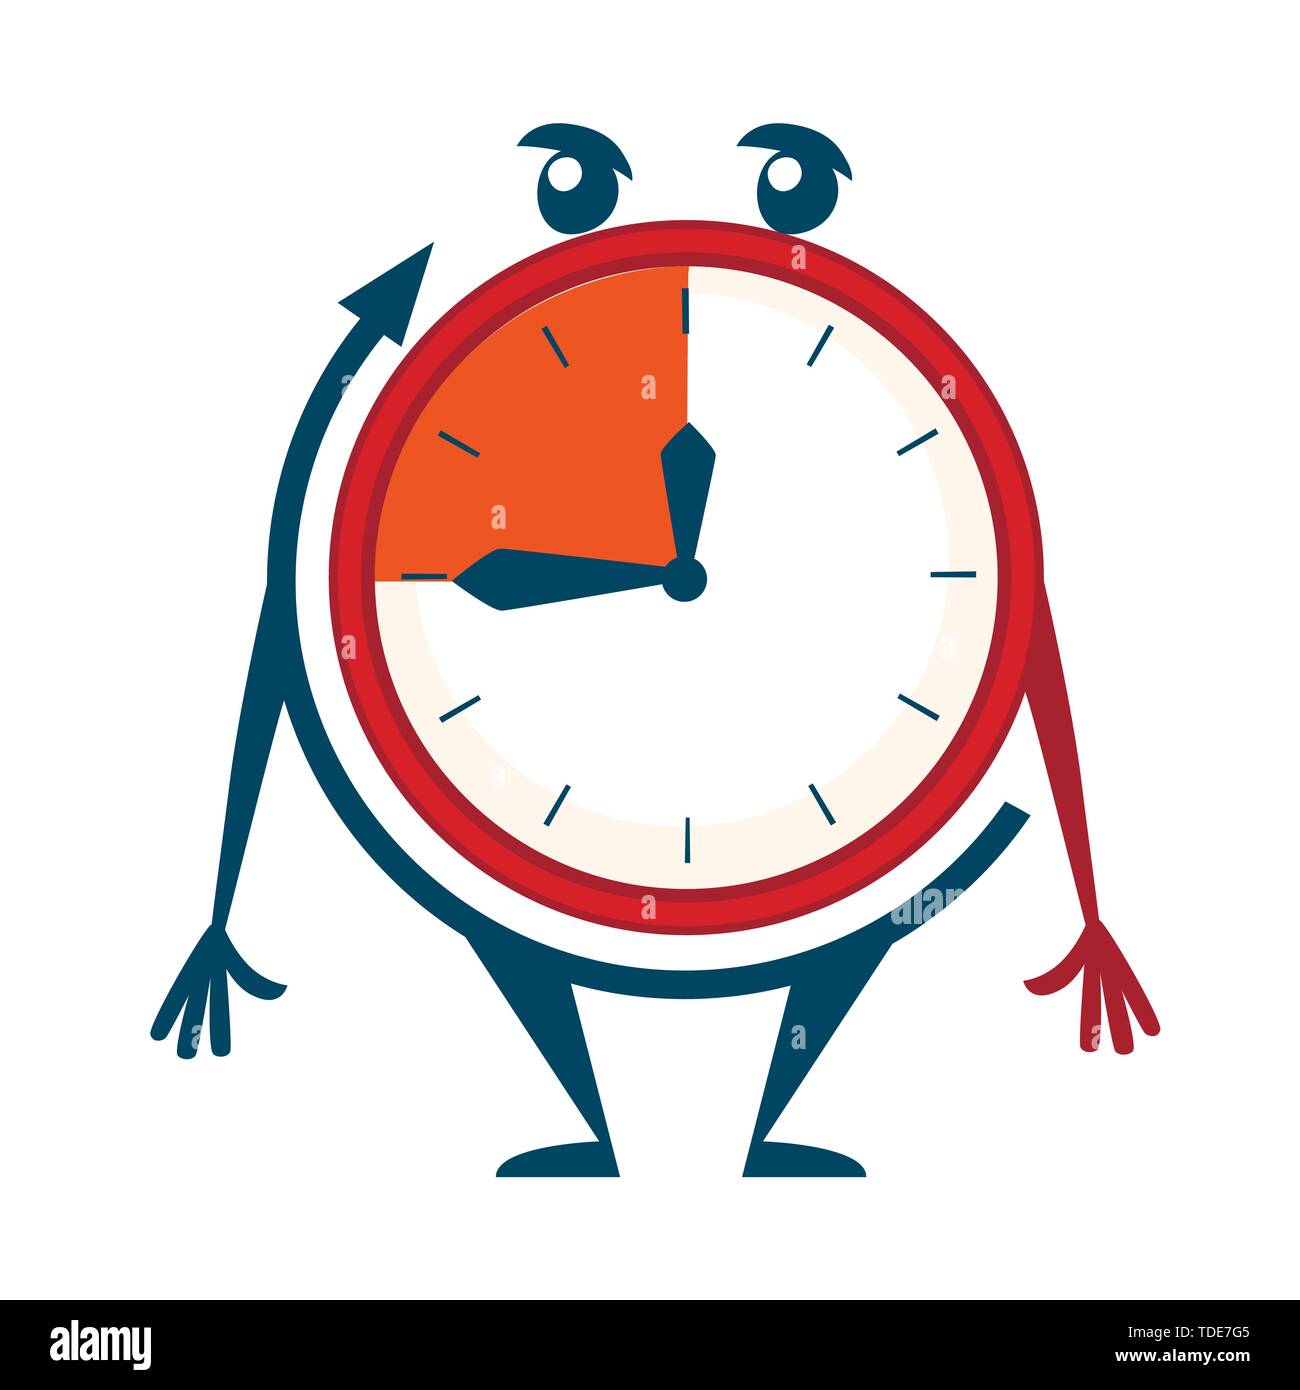 Clock face with deadline time. Red clock face ,3 minutes. Flat vector illustration on white background. Stock Vector